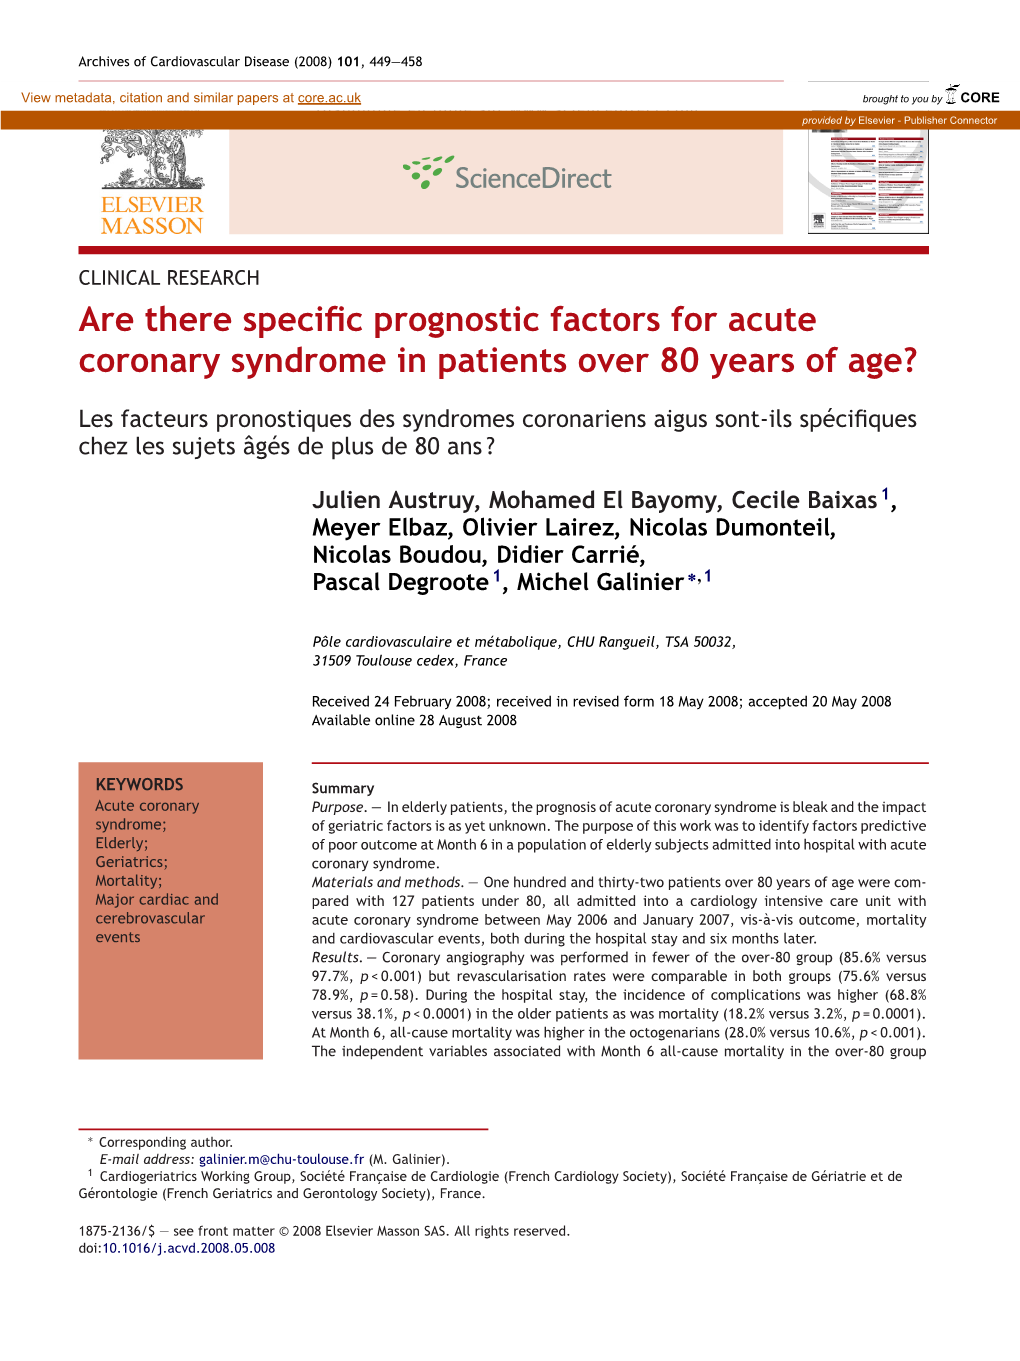 Are There Specific Prognostic Factors for Acute Coronary Syndrome In